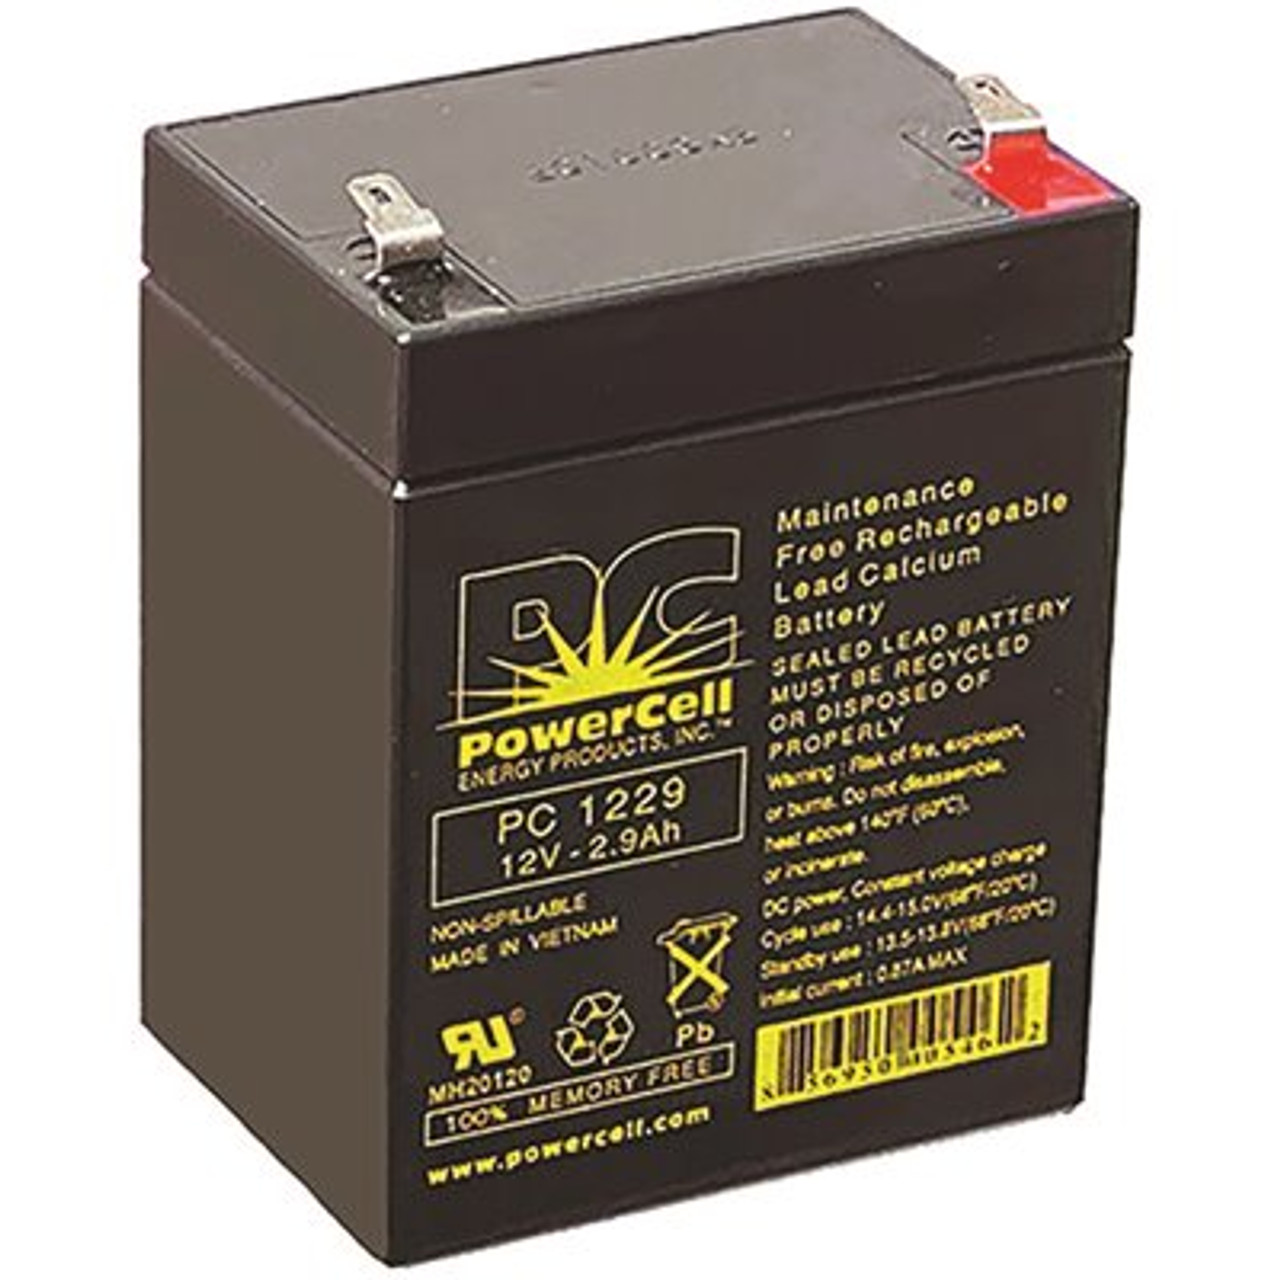 12-Volt 2.9 Ah, F1 Terminal, Sealed Lead-Acid, AGM, Maintenance Free, Rechargeable, Non-spillable, Battery